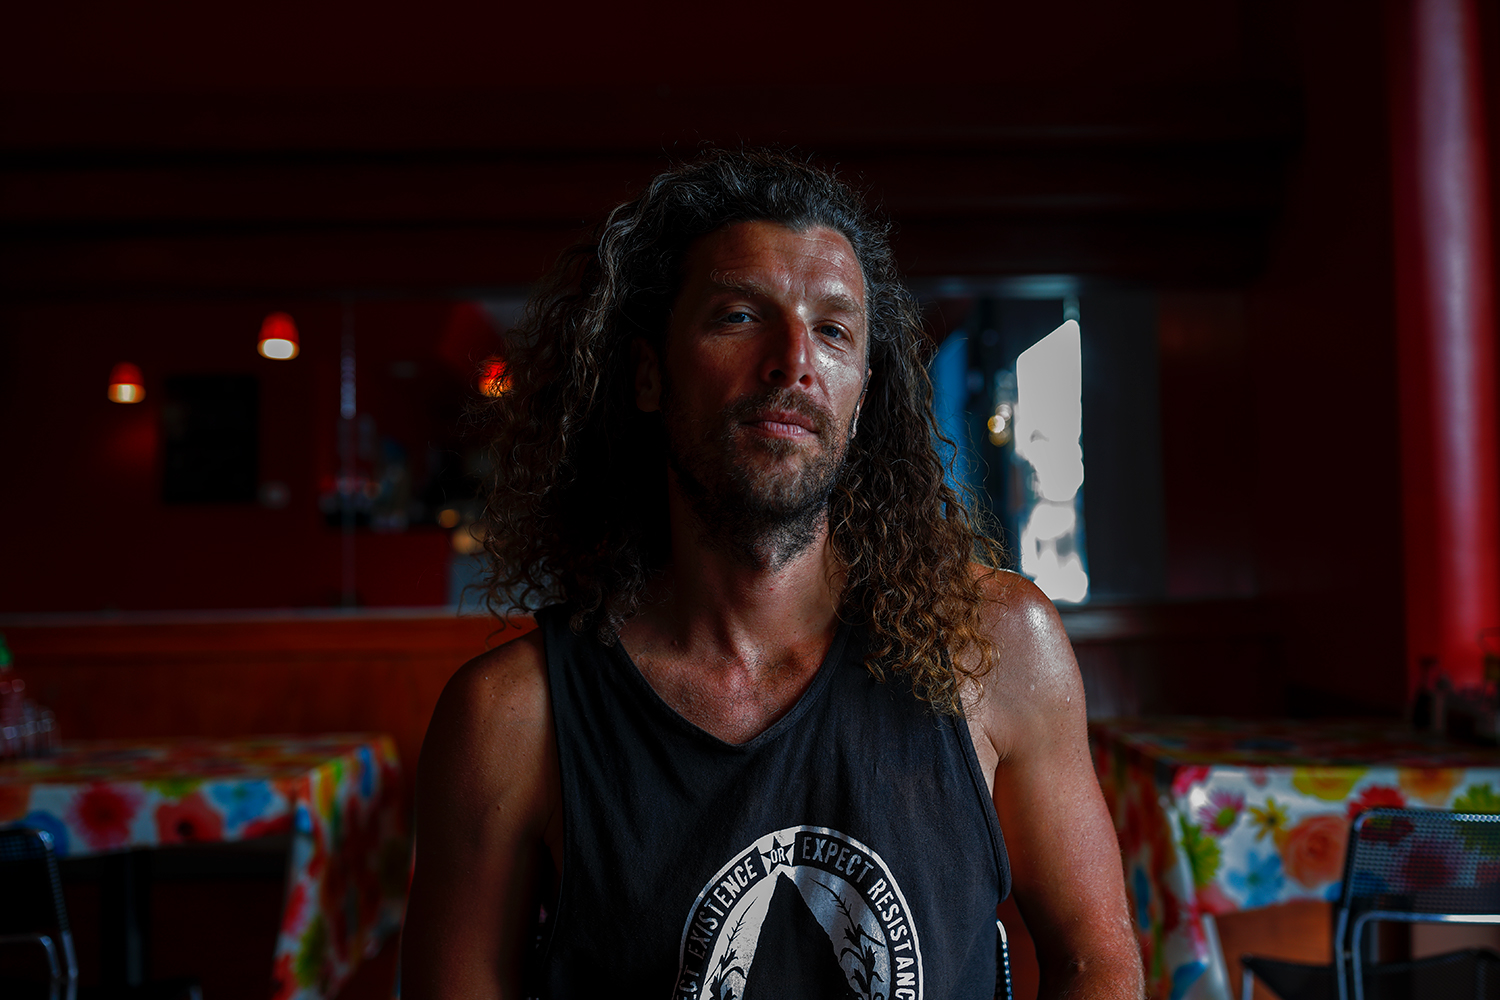 Photograph of protester protagonist Alexei Wood at a restaurant in Los Angeles California, 2019